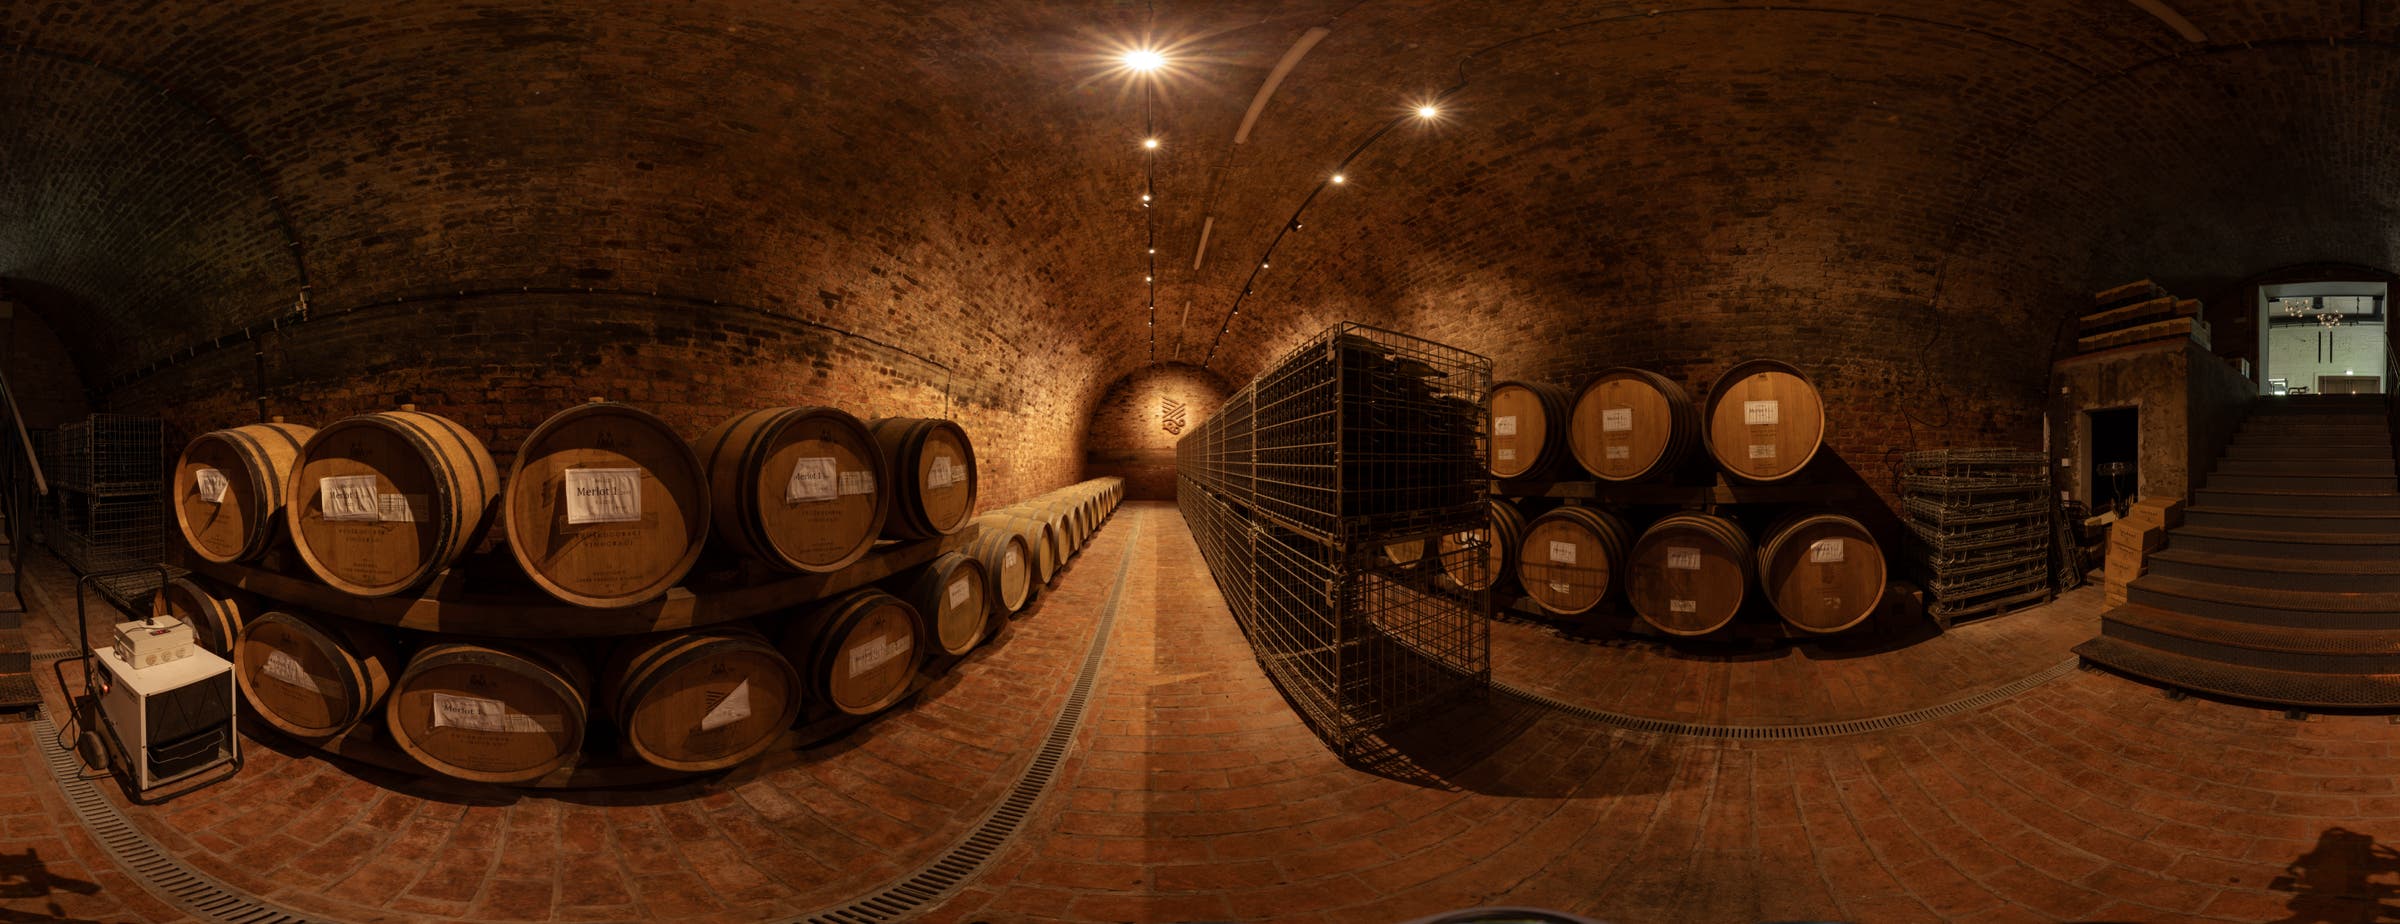 The image shows a 360° view of a wine cellar used for storage of barrels along the walls. In the middle of the hall, along the aisle, metal boxes are placed for storing glass bottles of wine.